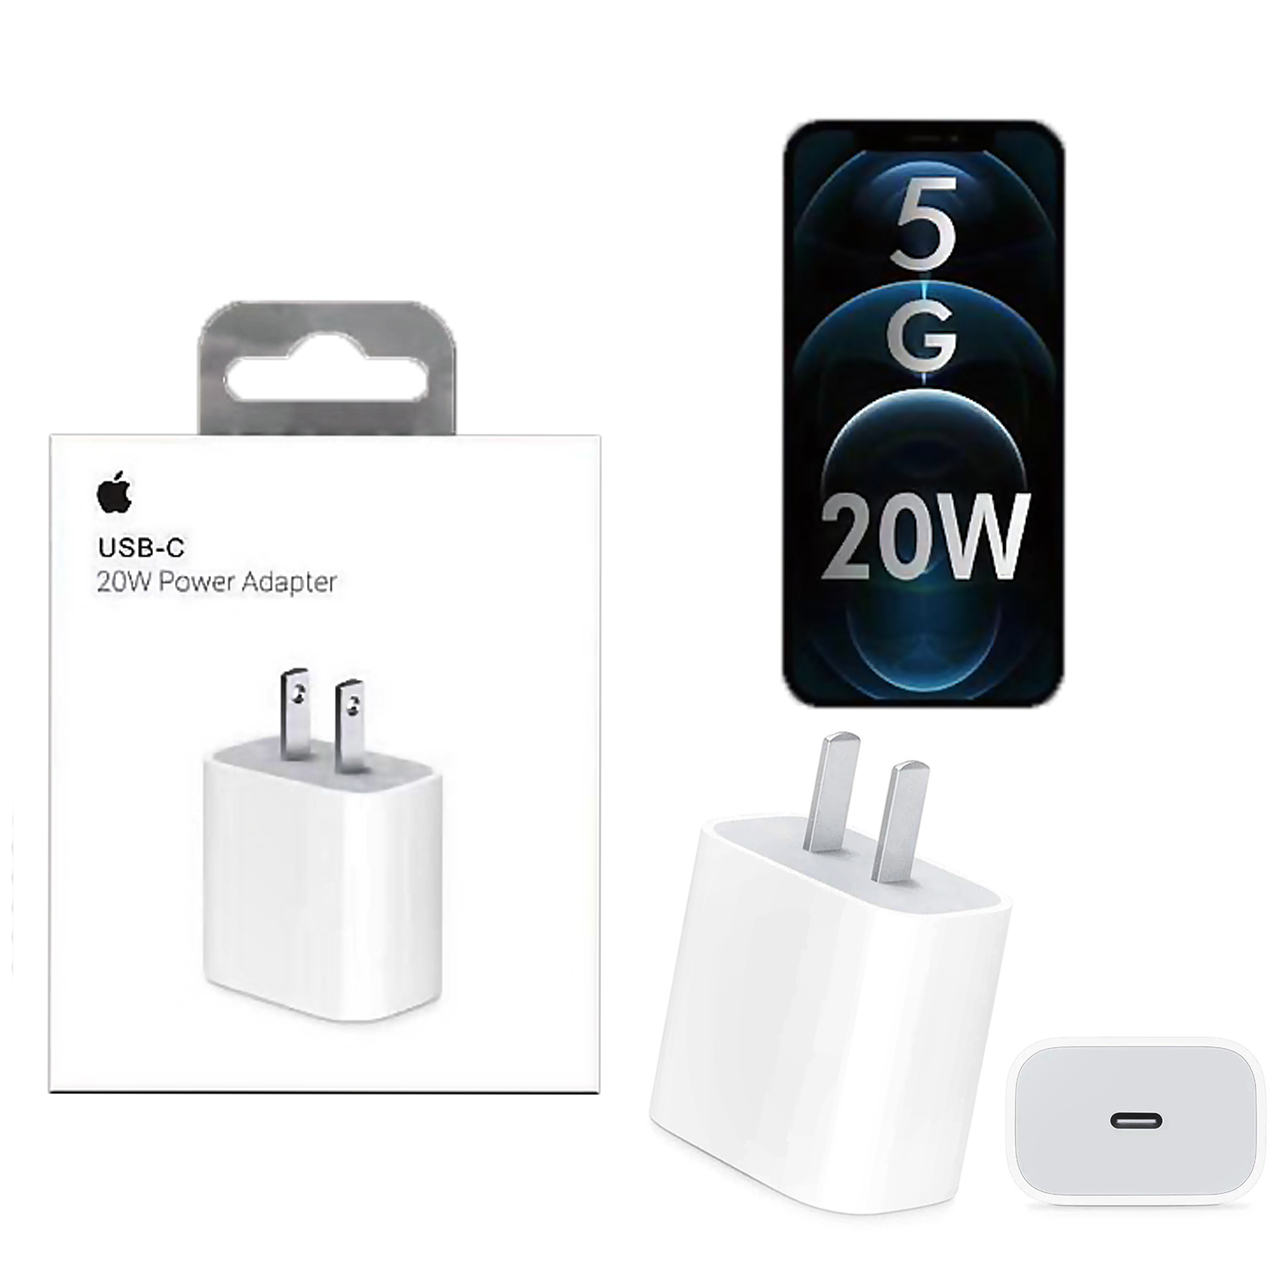 https://rcmmultimedia.com/storage/photos/1/Adapters + cables/iphone_usb-c_pd_20w_power_adapter_charger_2_pin_usa_pin1628158624.jpg